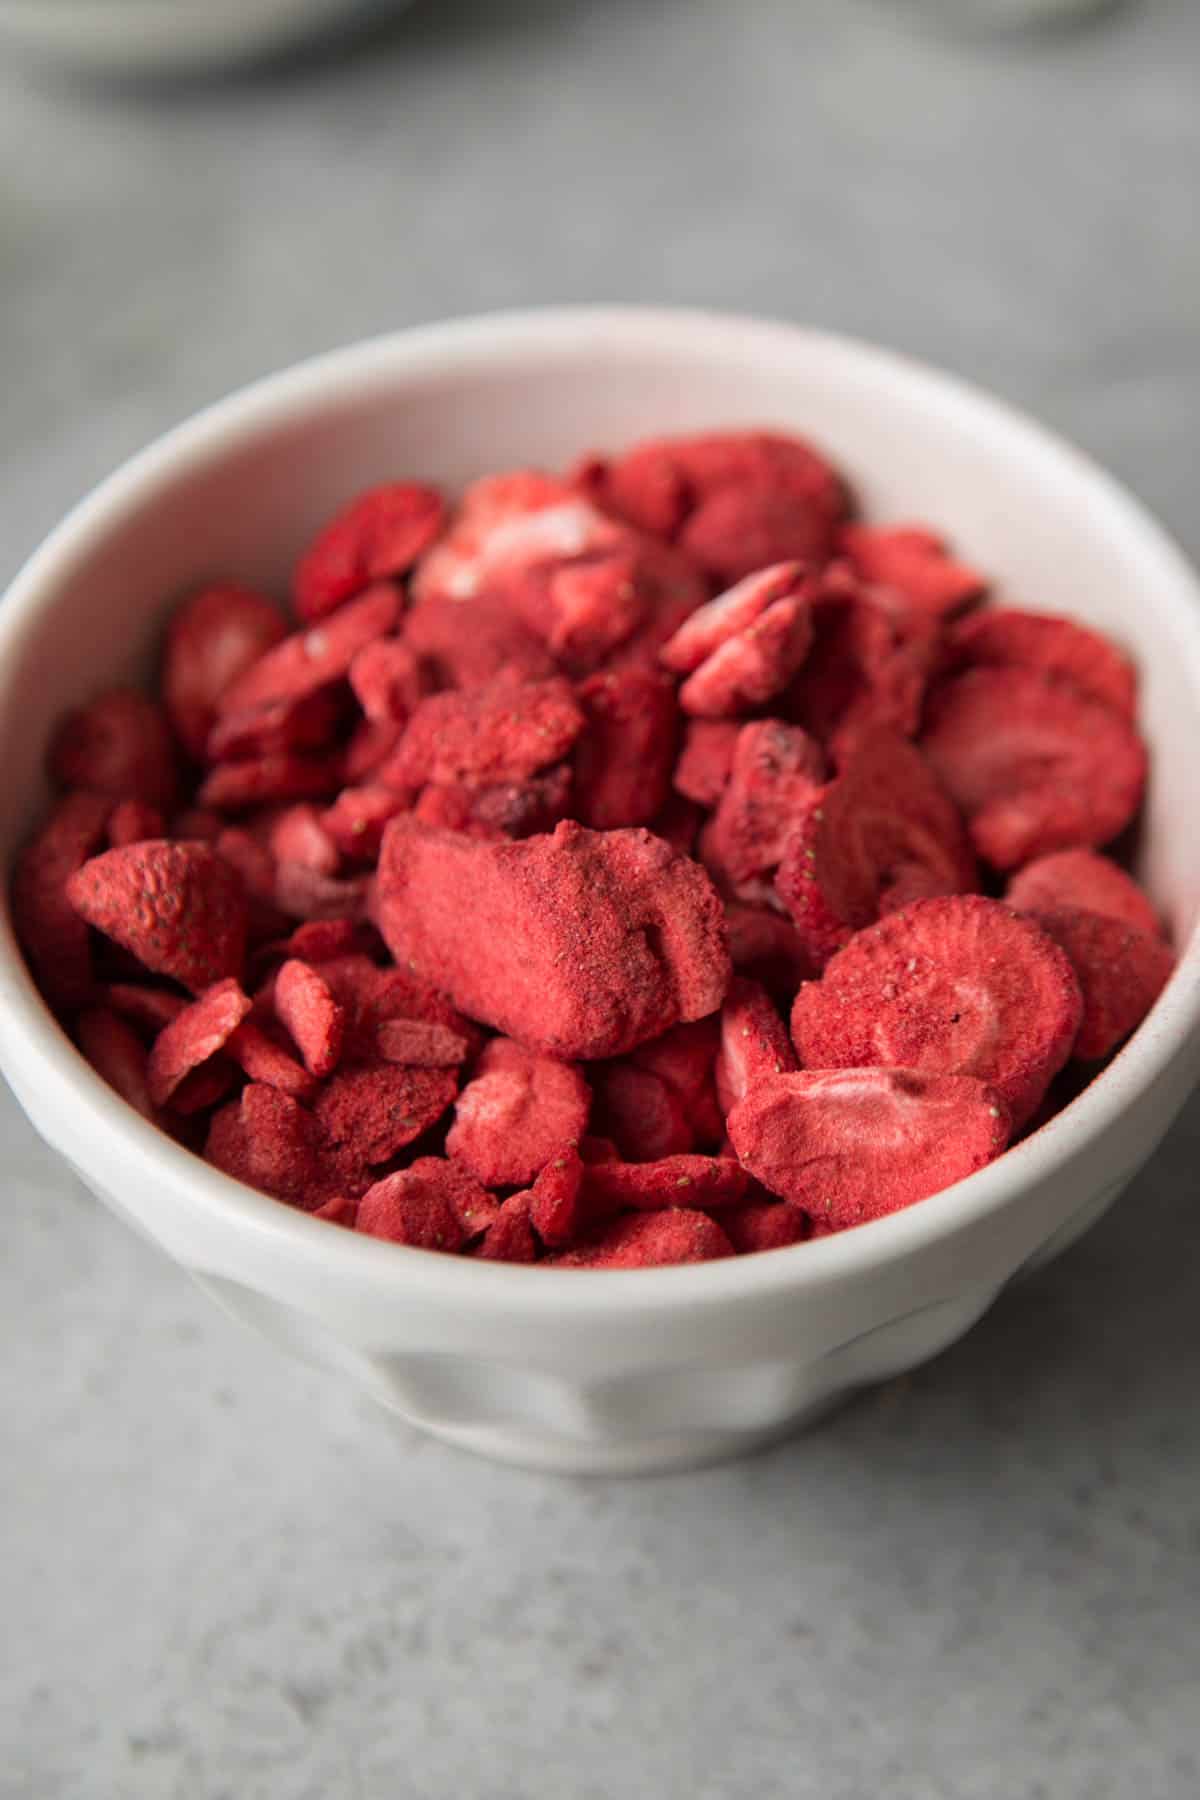 freeze dried strawberries in bowl.